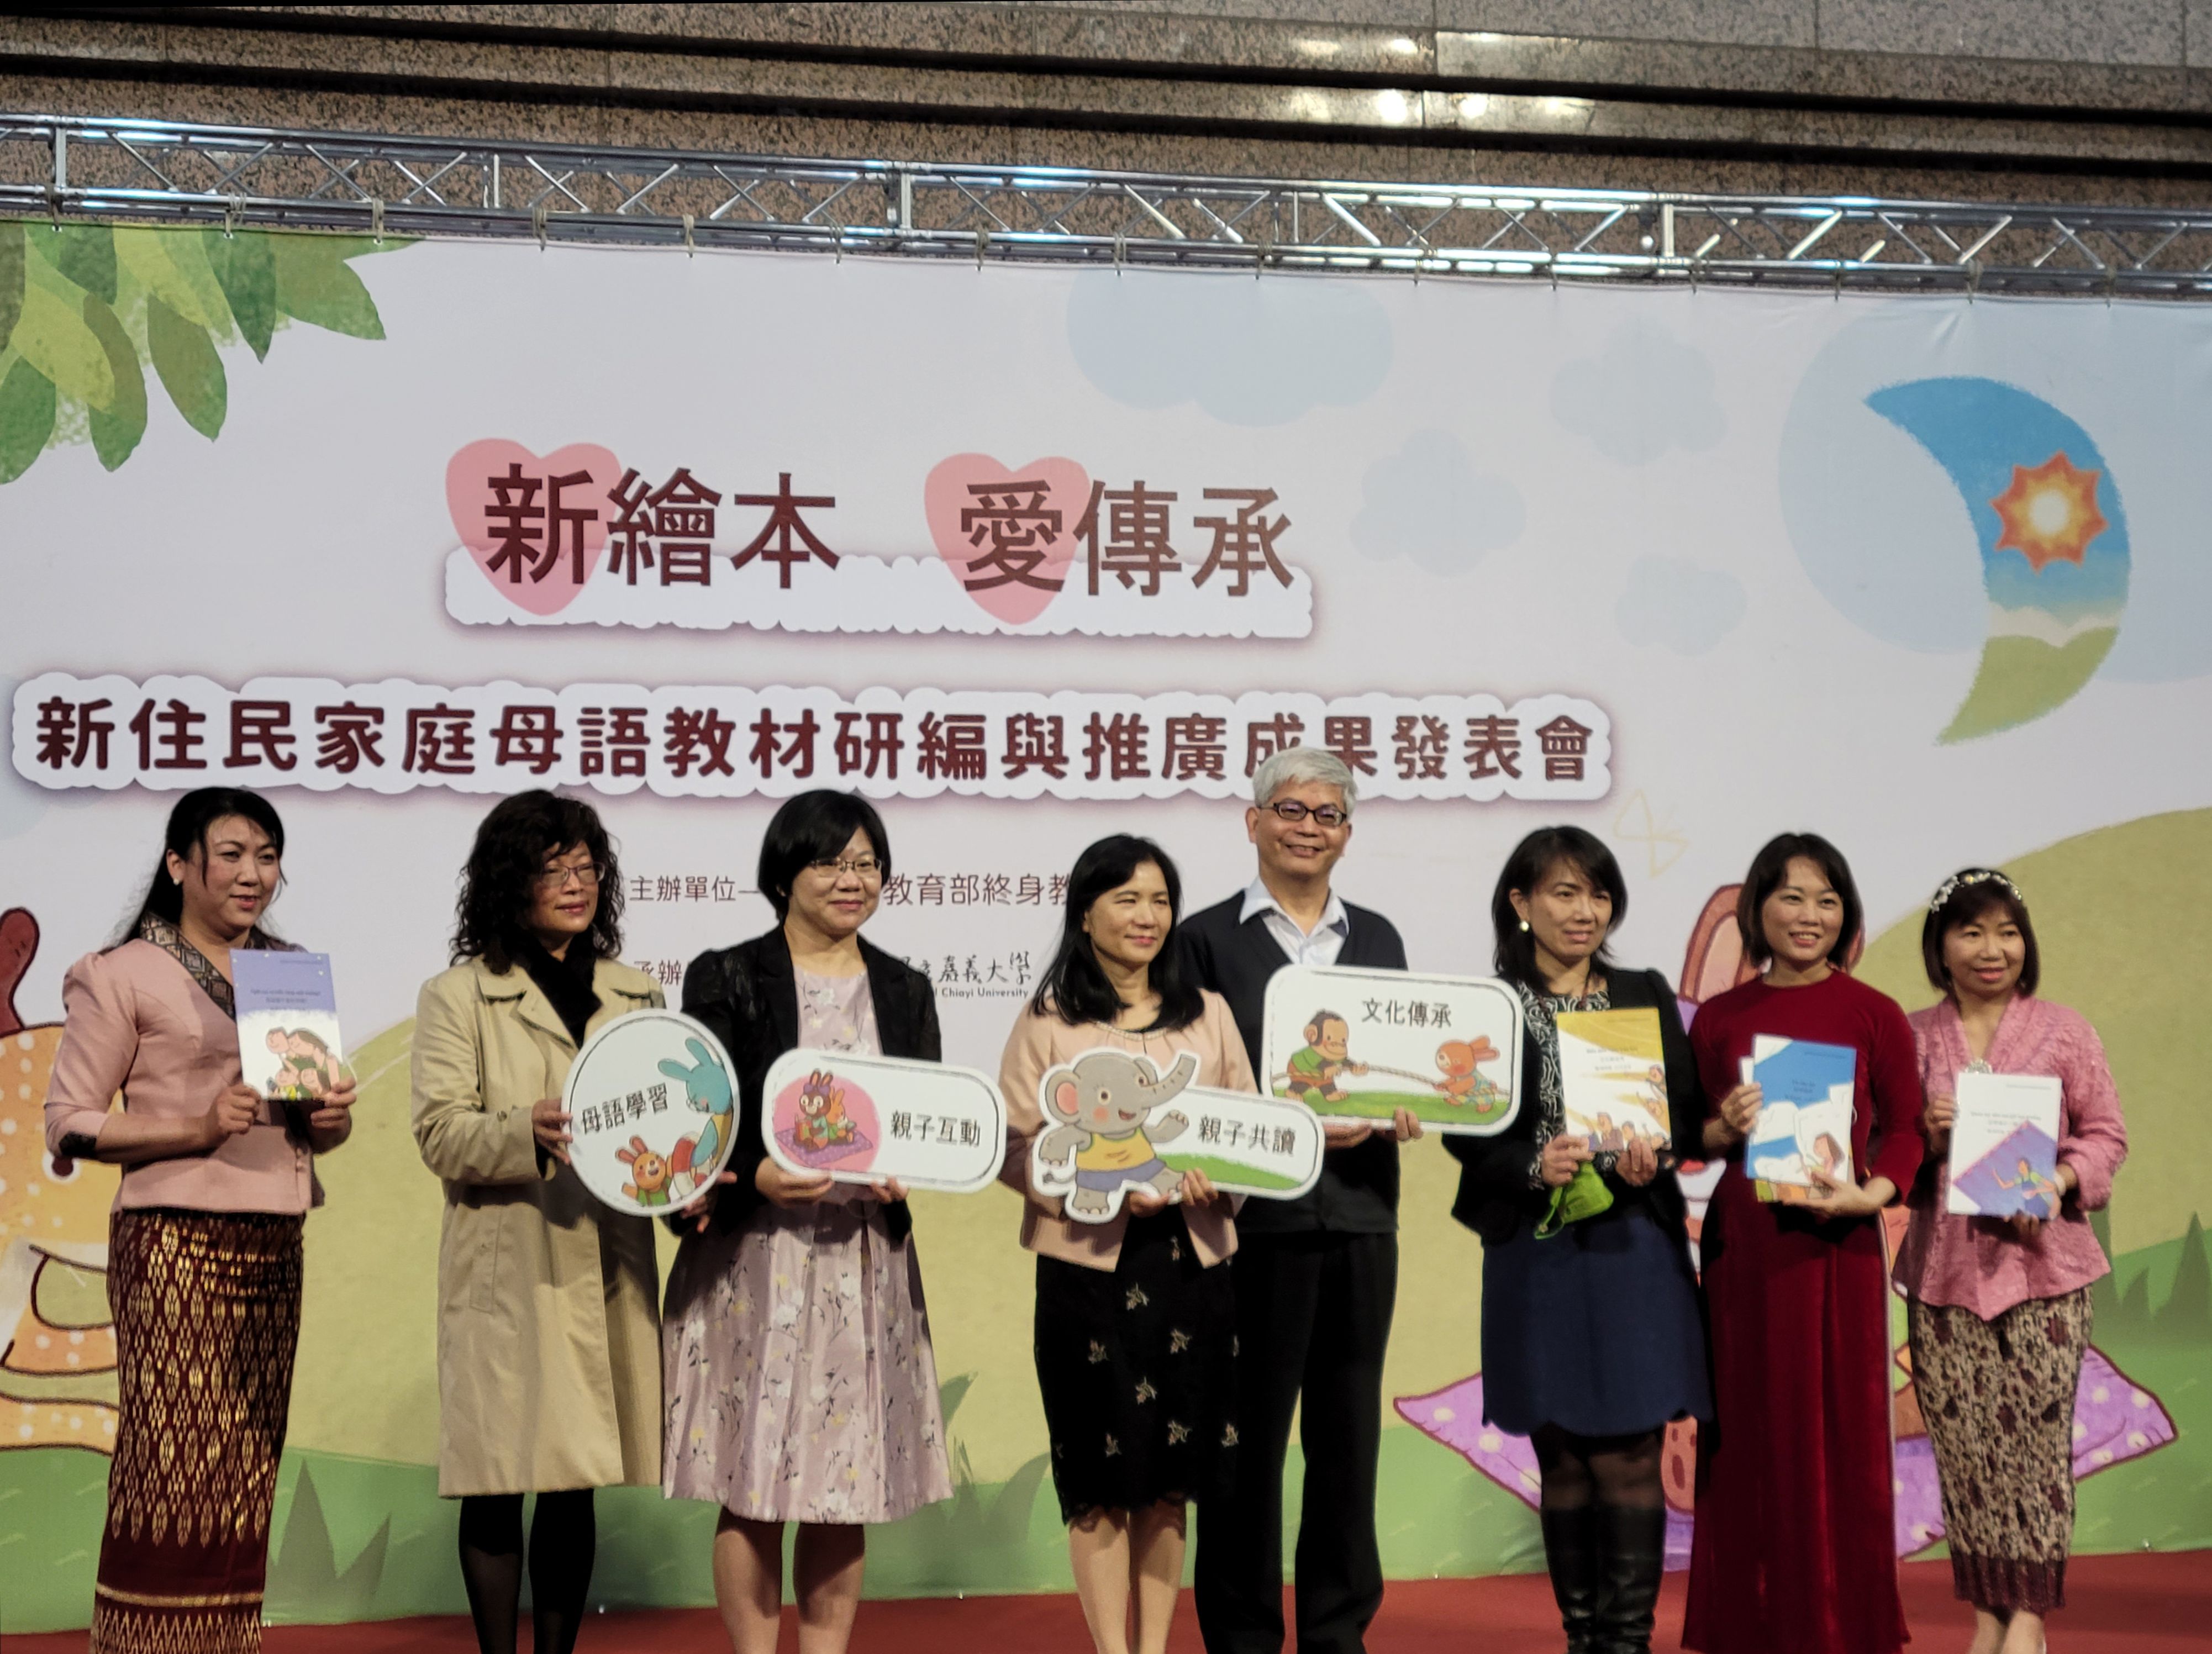 The teaching materials are in Chinese and 7 other native languages. (Photo / Provided by National Chiayi University)